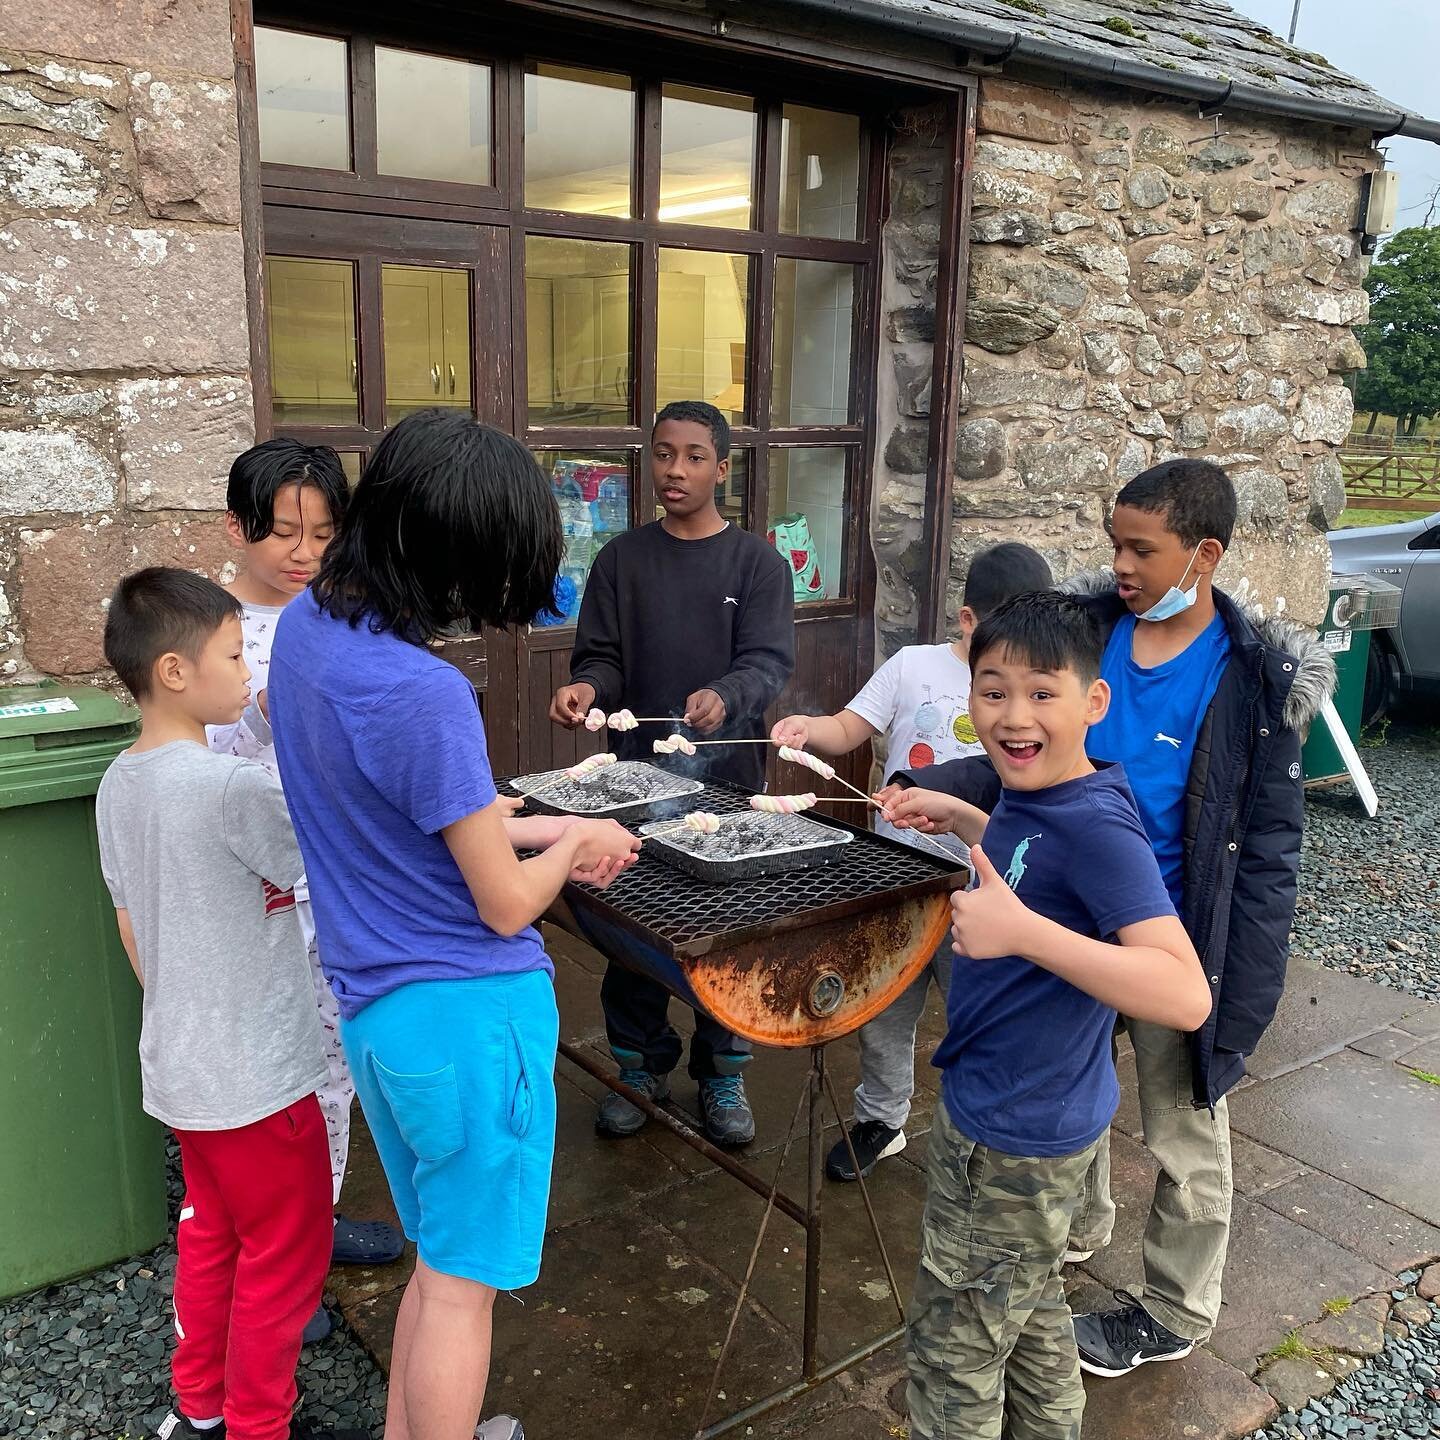 Wing Chun camping trip Day 1: Roasted marshmallows after dinner 😋 #thewingchunschool